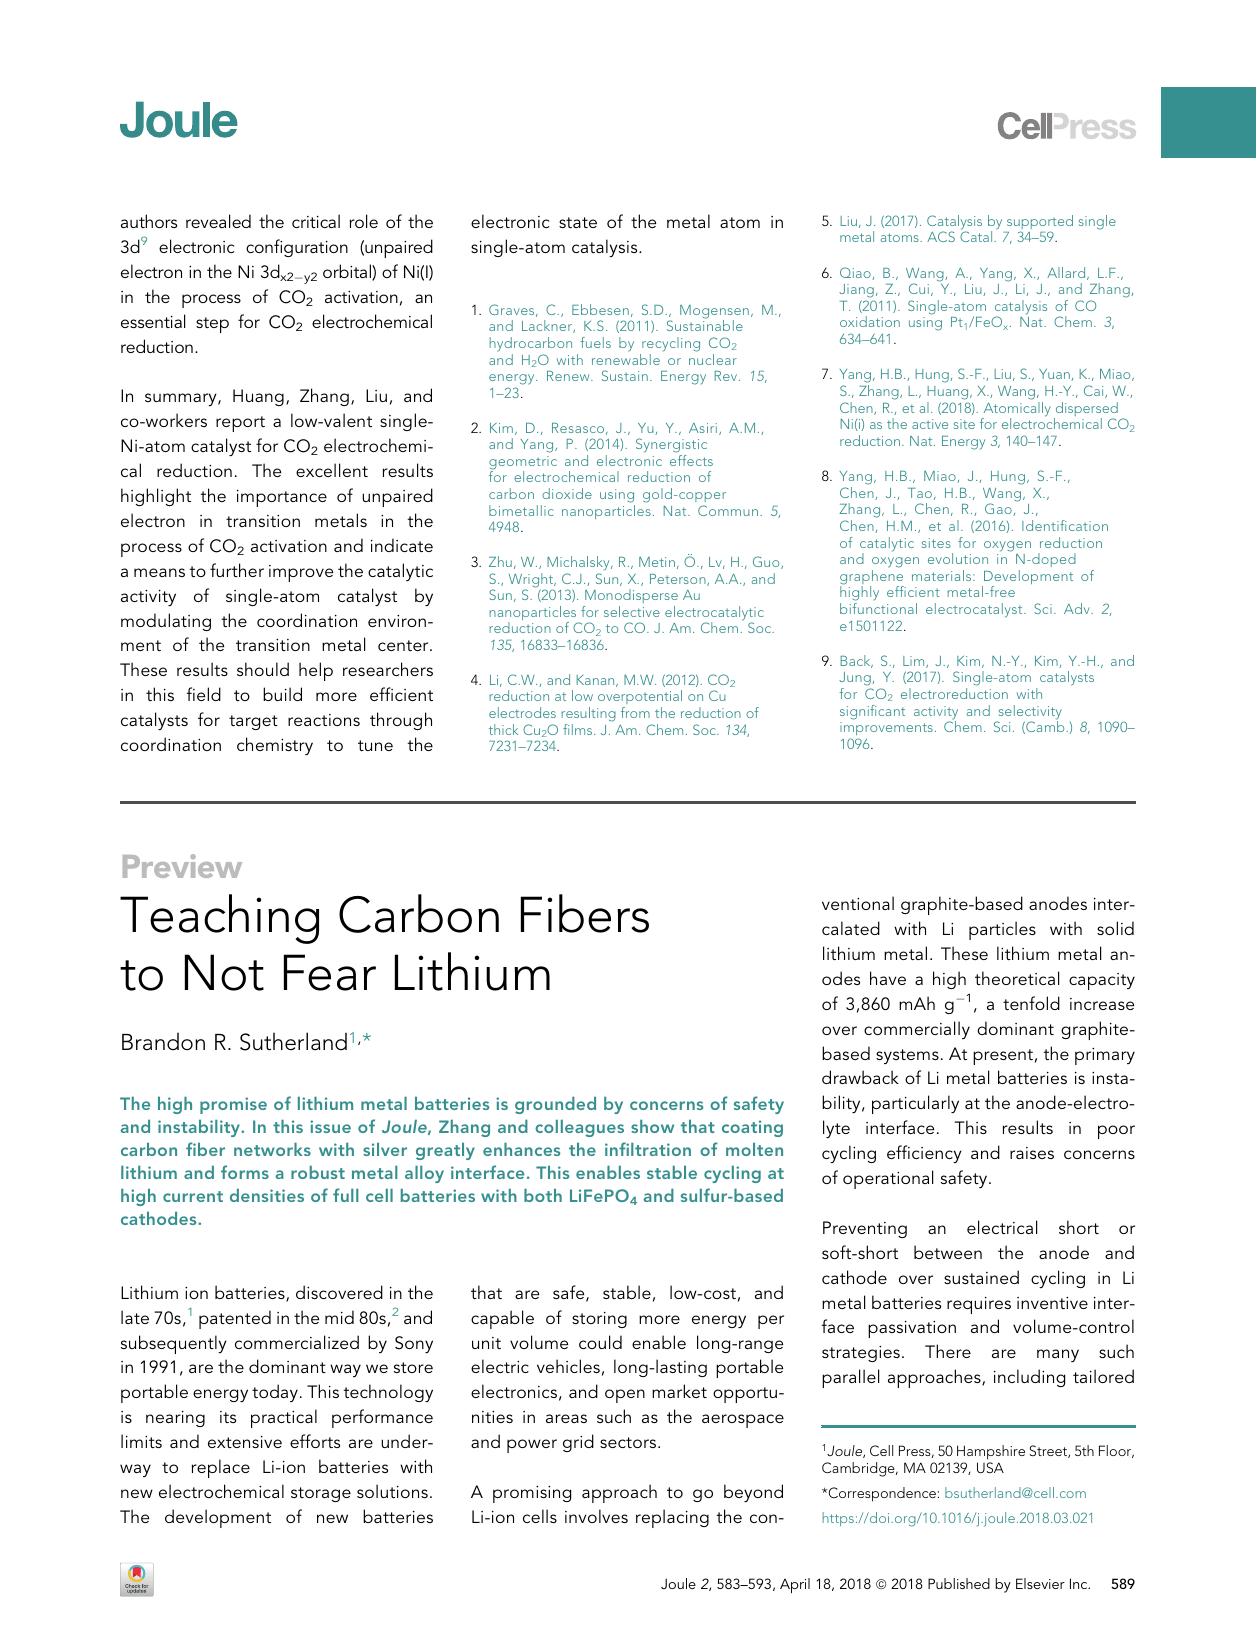 Teaching Carbon Fibers to Not Fear Lithium by Brandon R. Sutherland